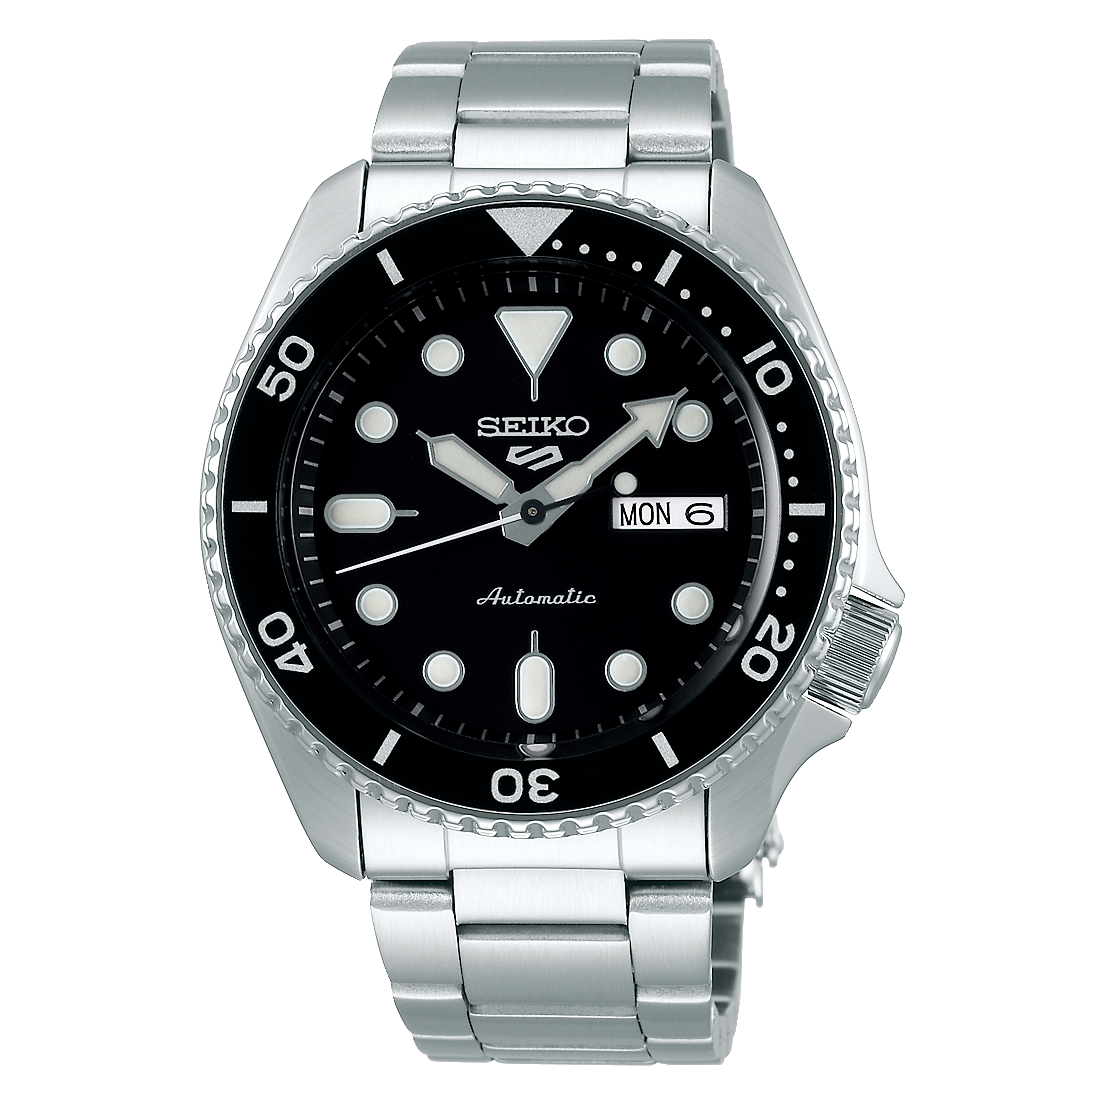 GTS SEIKO SRPD55 AUTOMATIC BLACK FACE WATCH